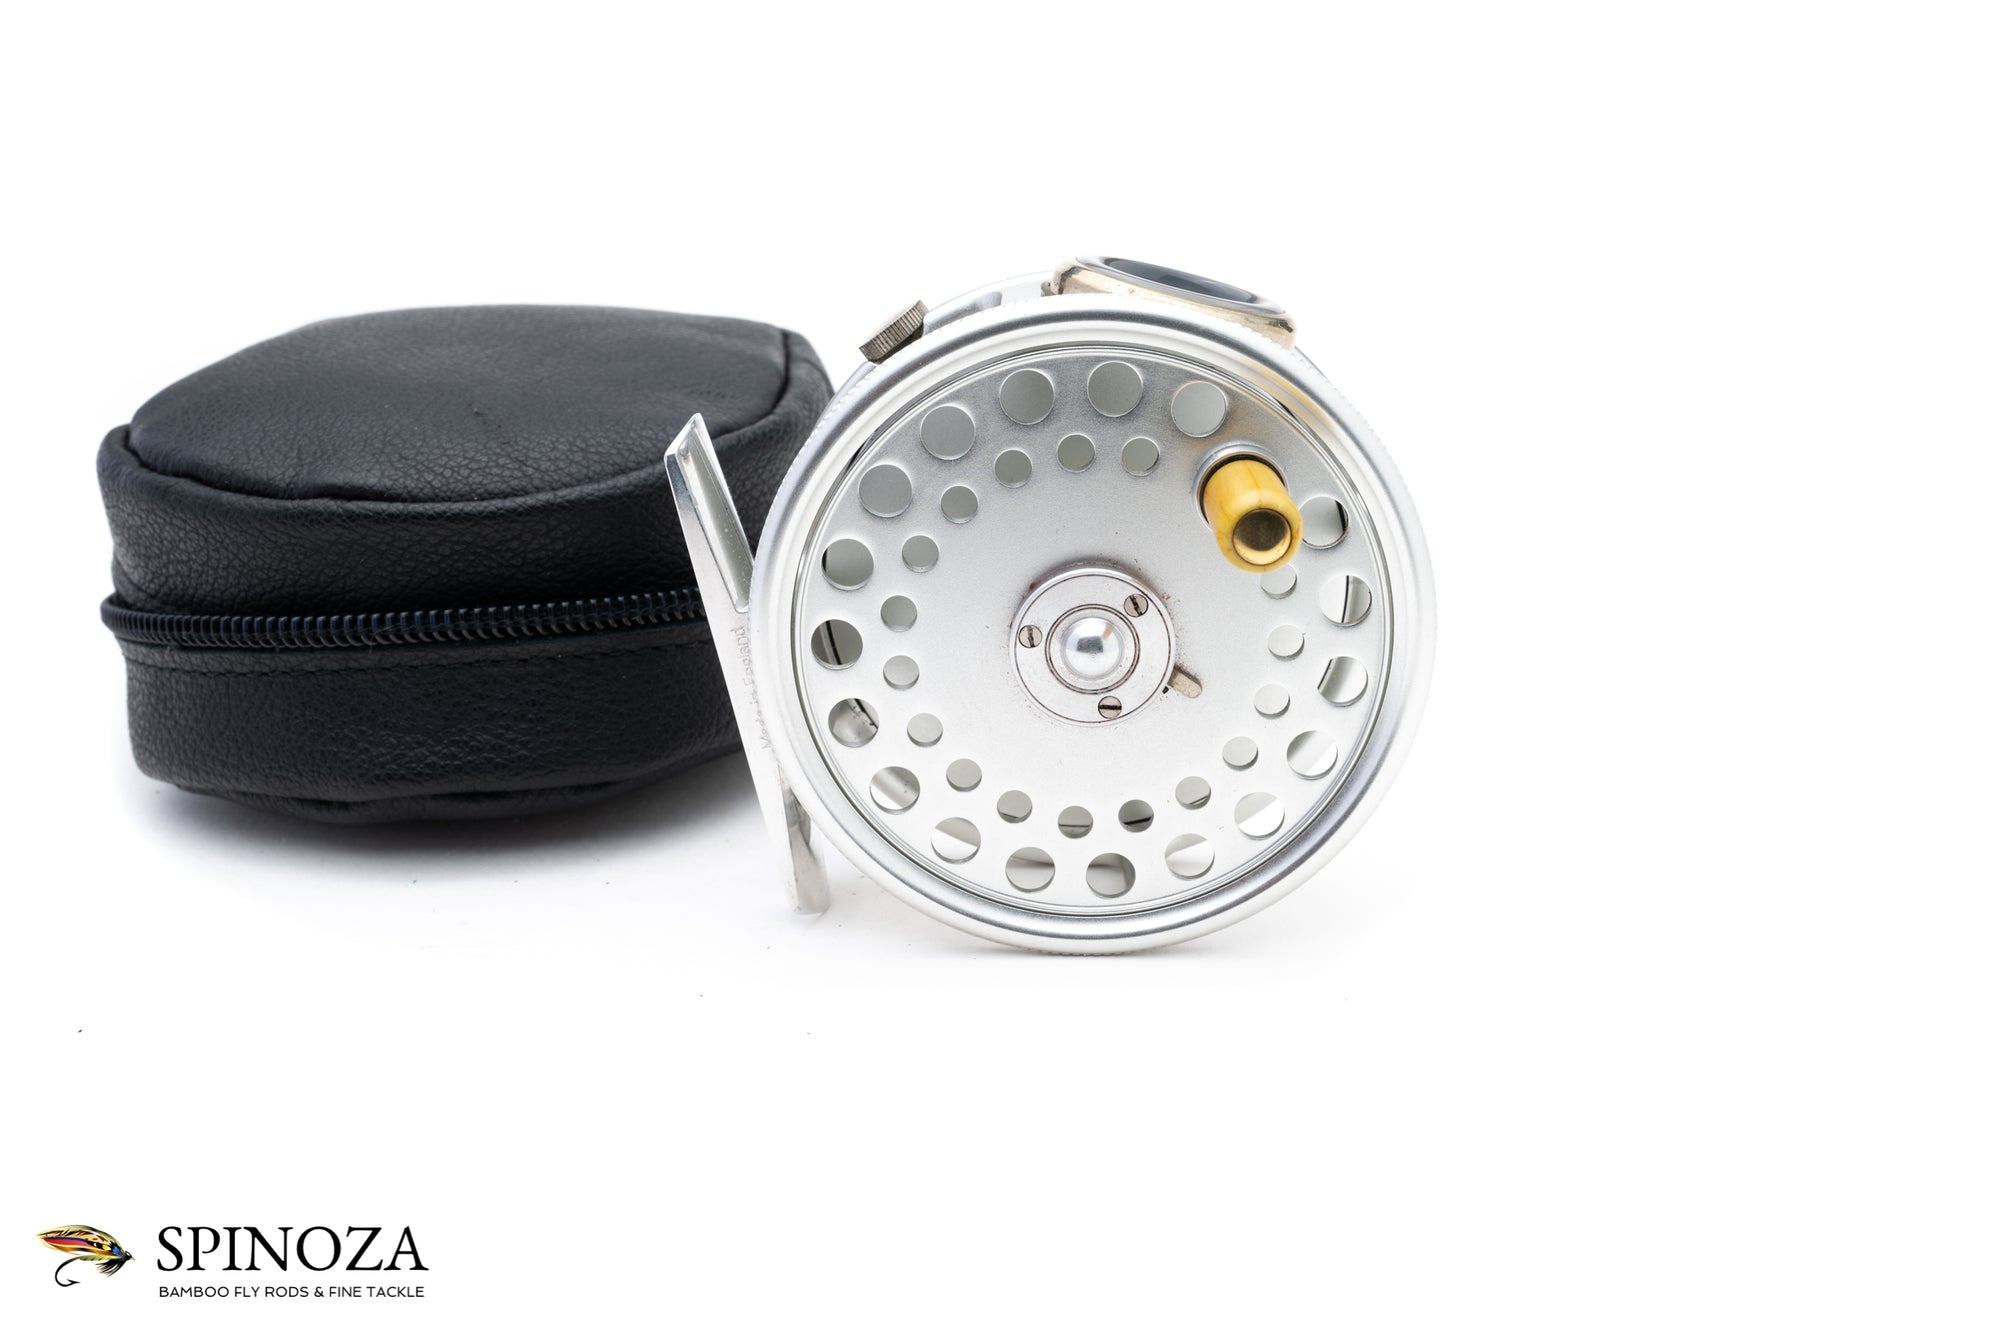 Hardy St George Spitfire Fly Reel 3"